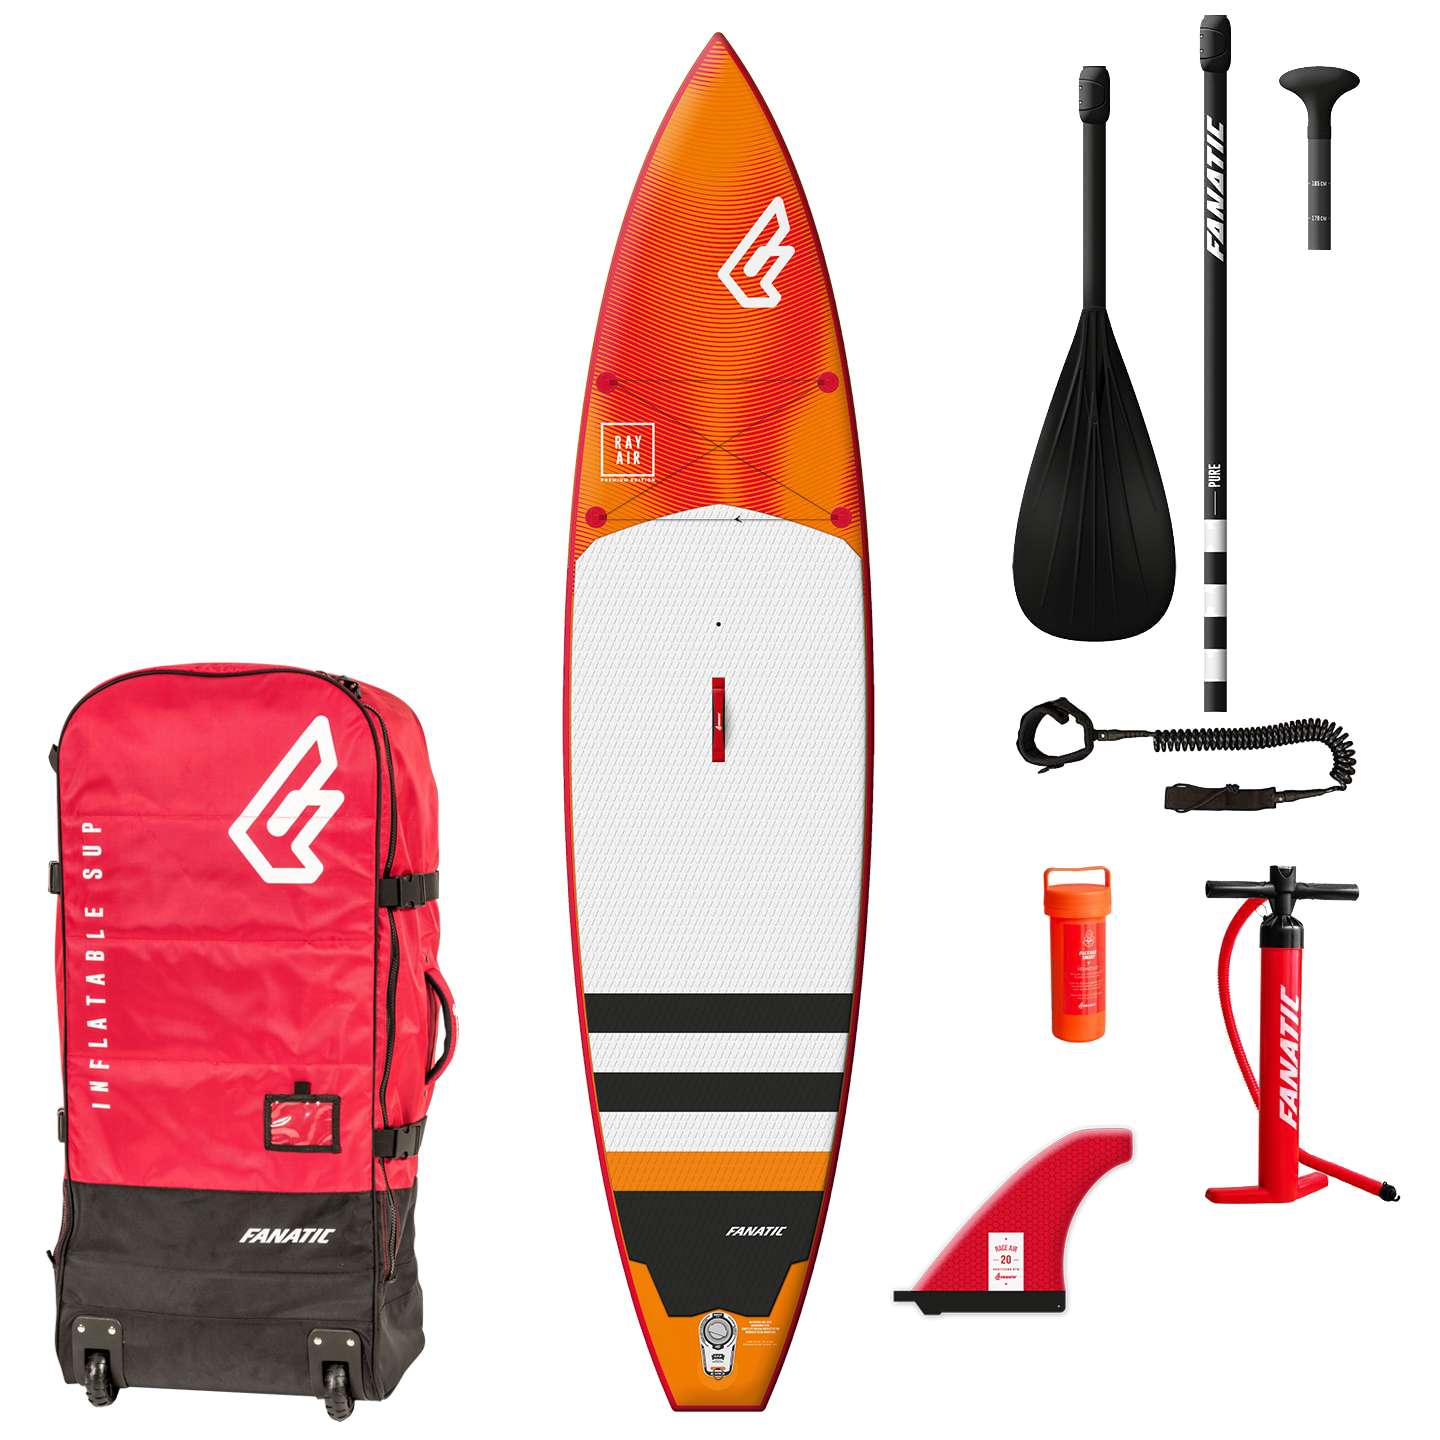 Fanatic Ray Air Premium 2019 12'6 Inflatable SUP | King of Watersports